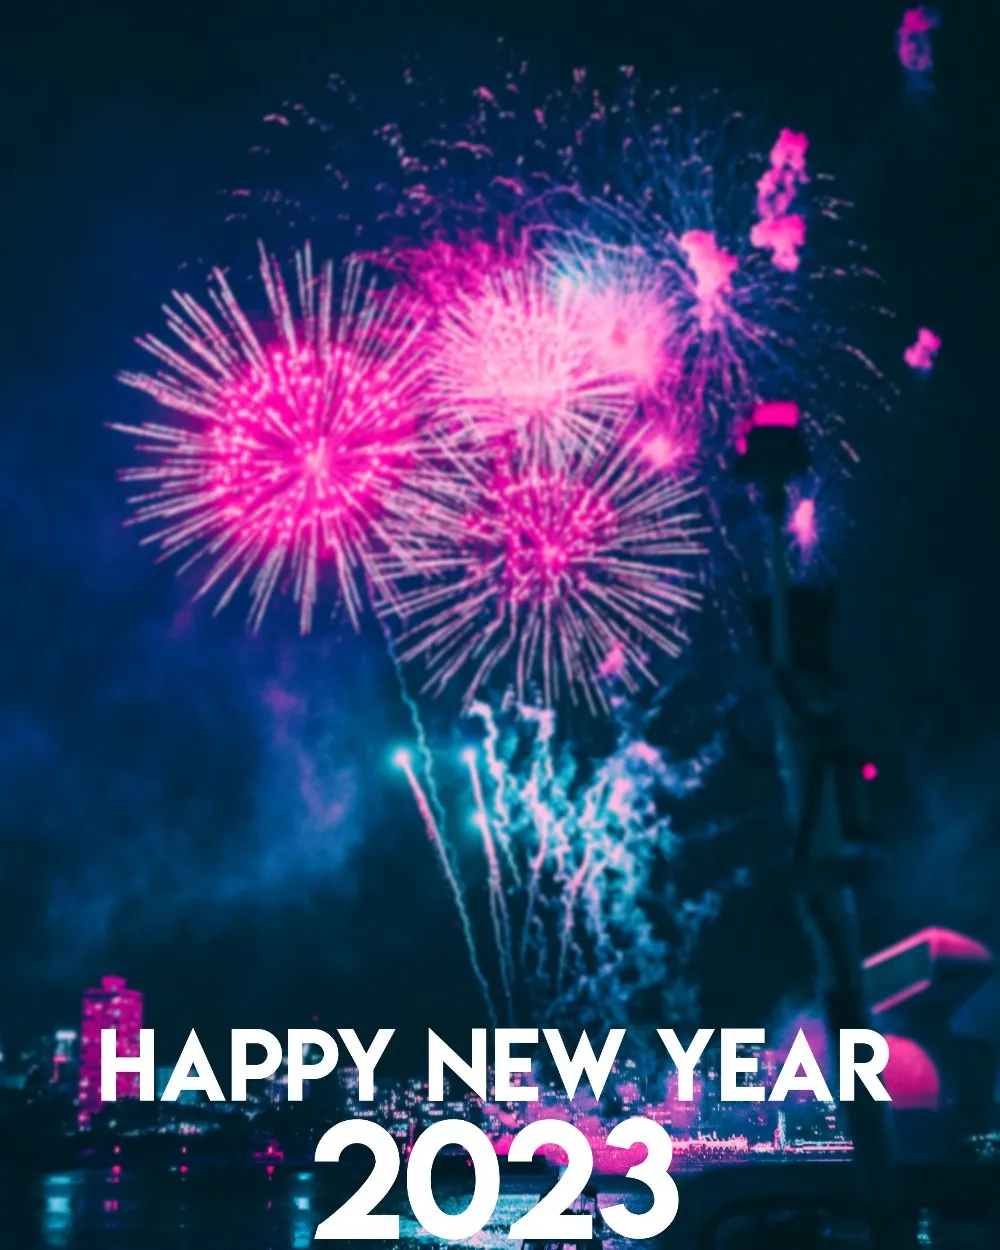 New year editing background download free 2023